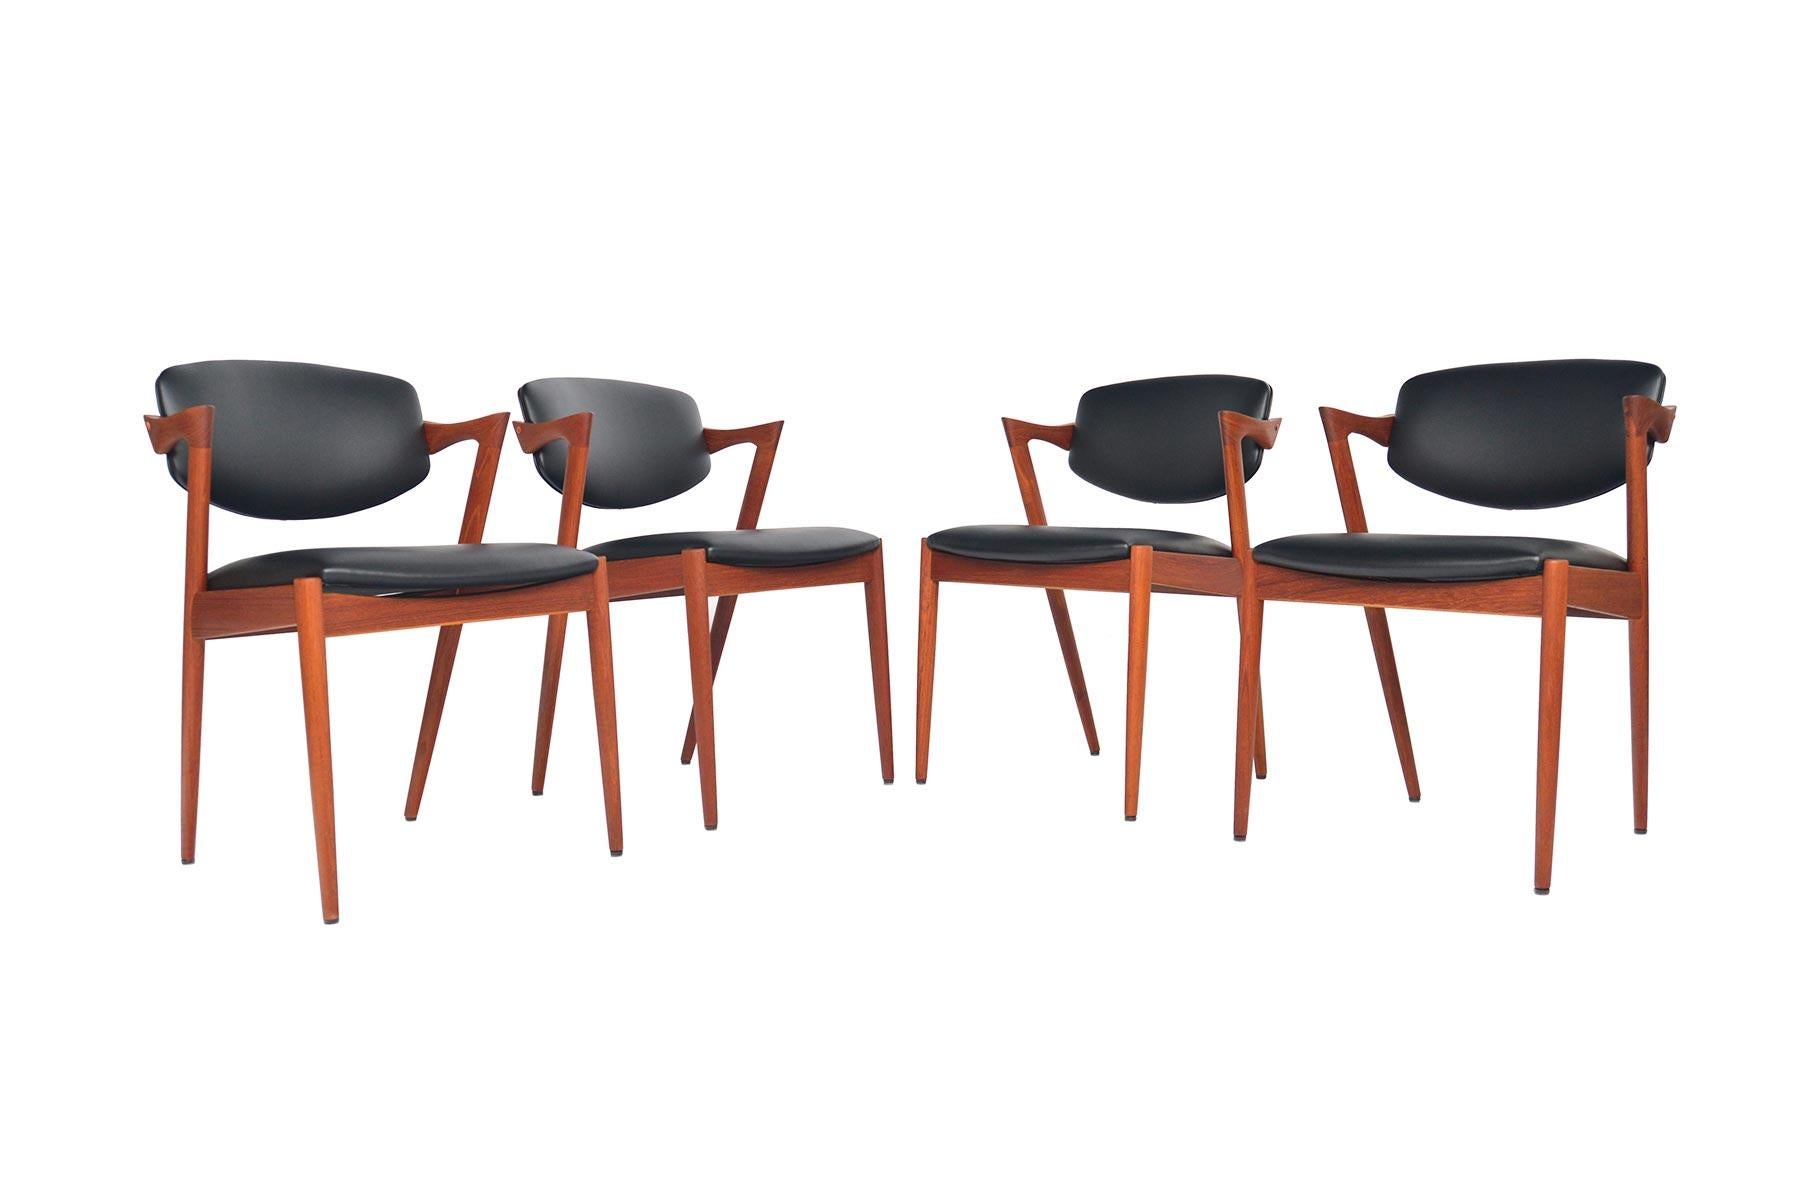 This incredible set of four Model 42 dining chairs was designed by Kai Kristiansen for Schou Andersen Møbelfabrik in 1957. Crafted in solid teak, these chairs feature a dramatic profile with a sleek armrest that extends into a canted back leg.